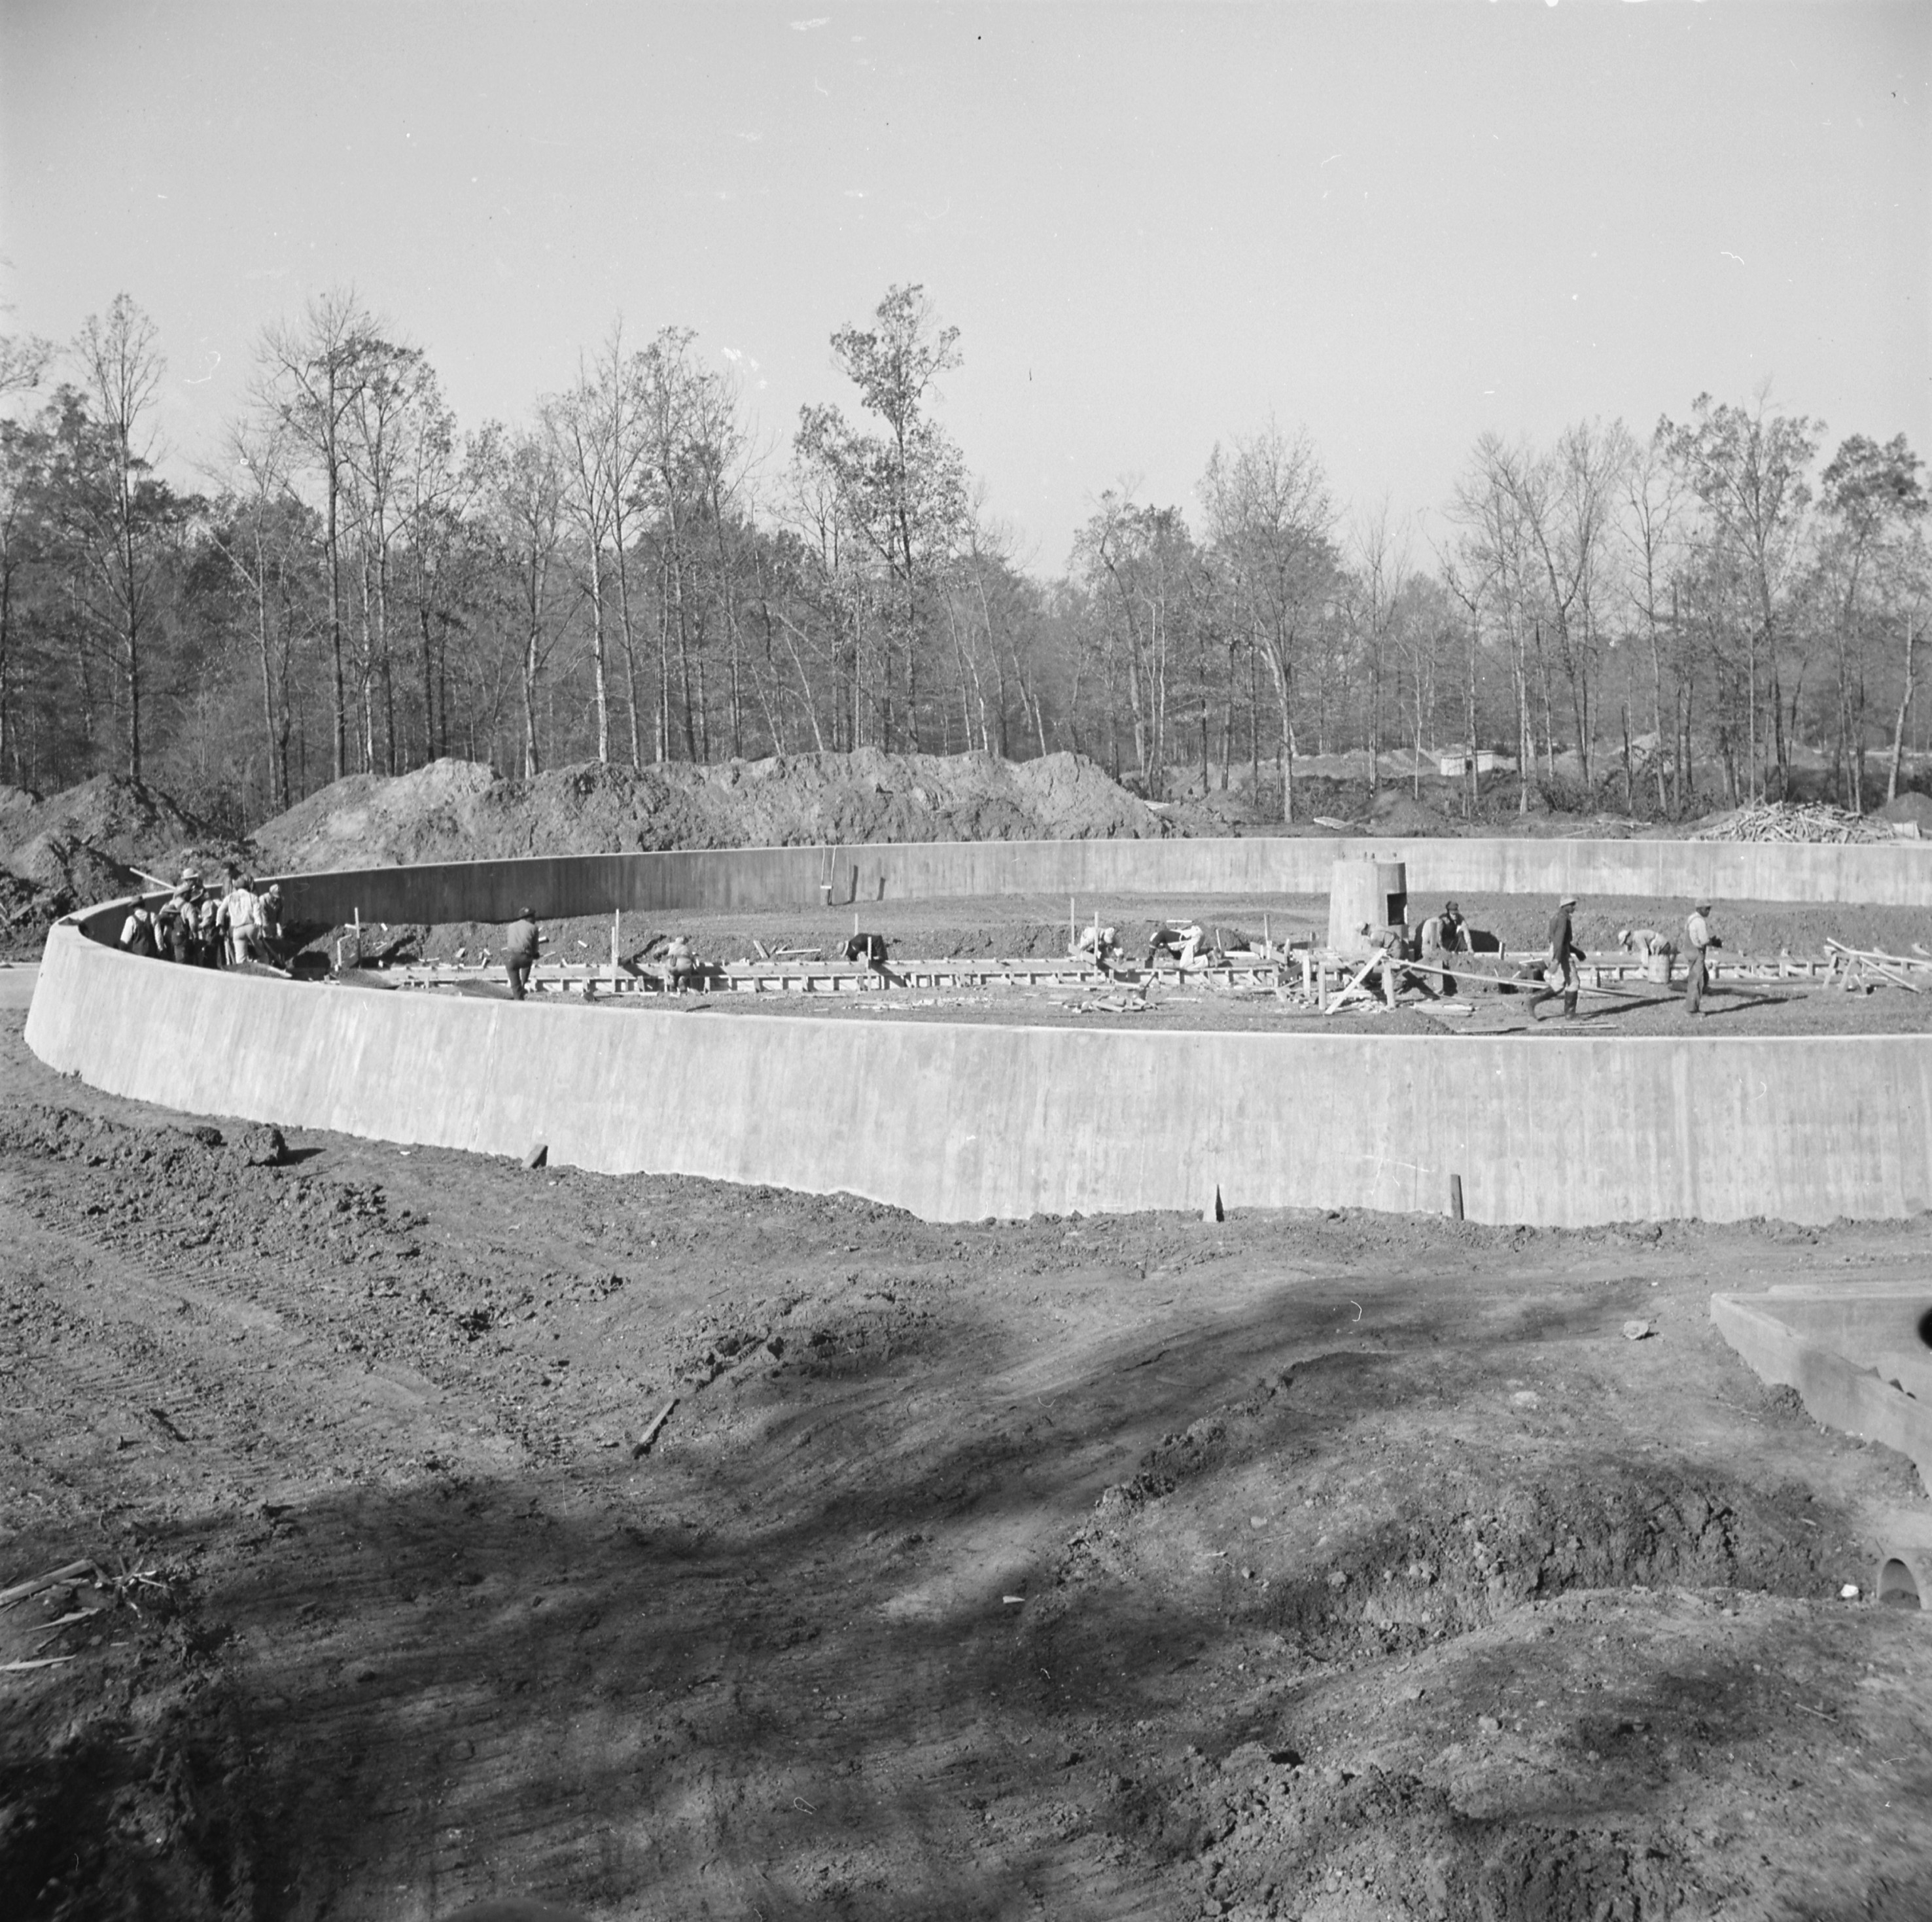 Construction of the sewage disposal plant at Jerome War Relocation Center, Arkansas, United States, 14 Nov 1942, photo 5 of 5